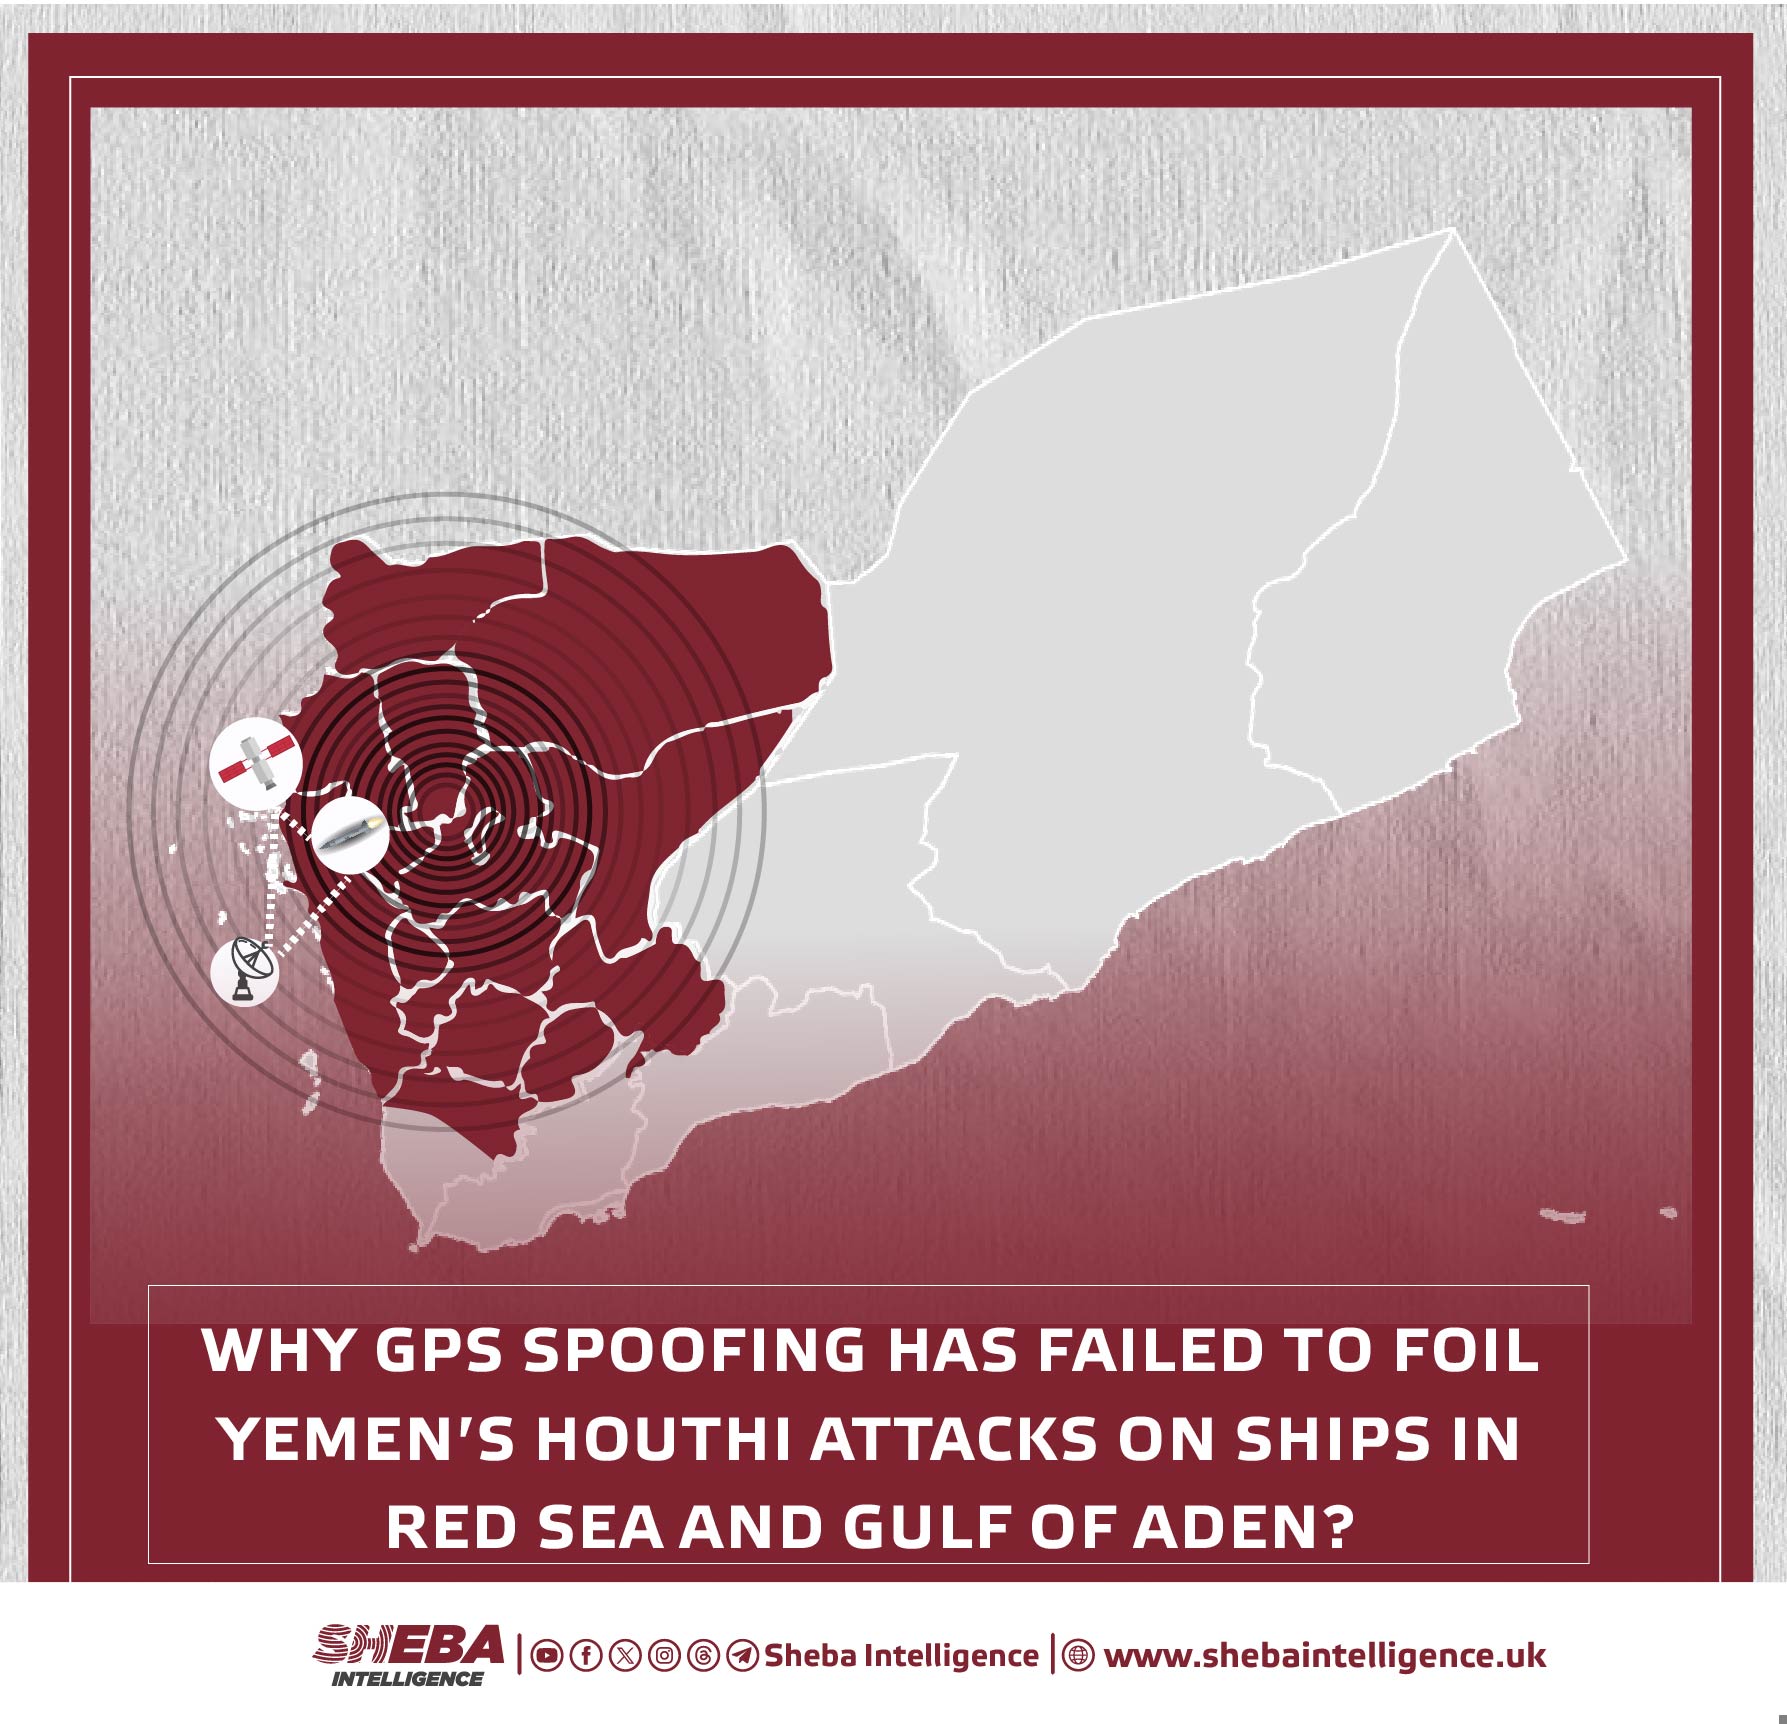 Why GPS Spoofing Has Failed to Foil Yemen's Houthi Attacks on Ships in Red Sea and Gulf of Aden?